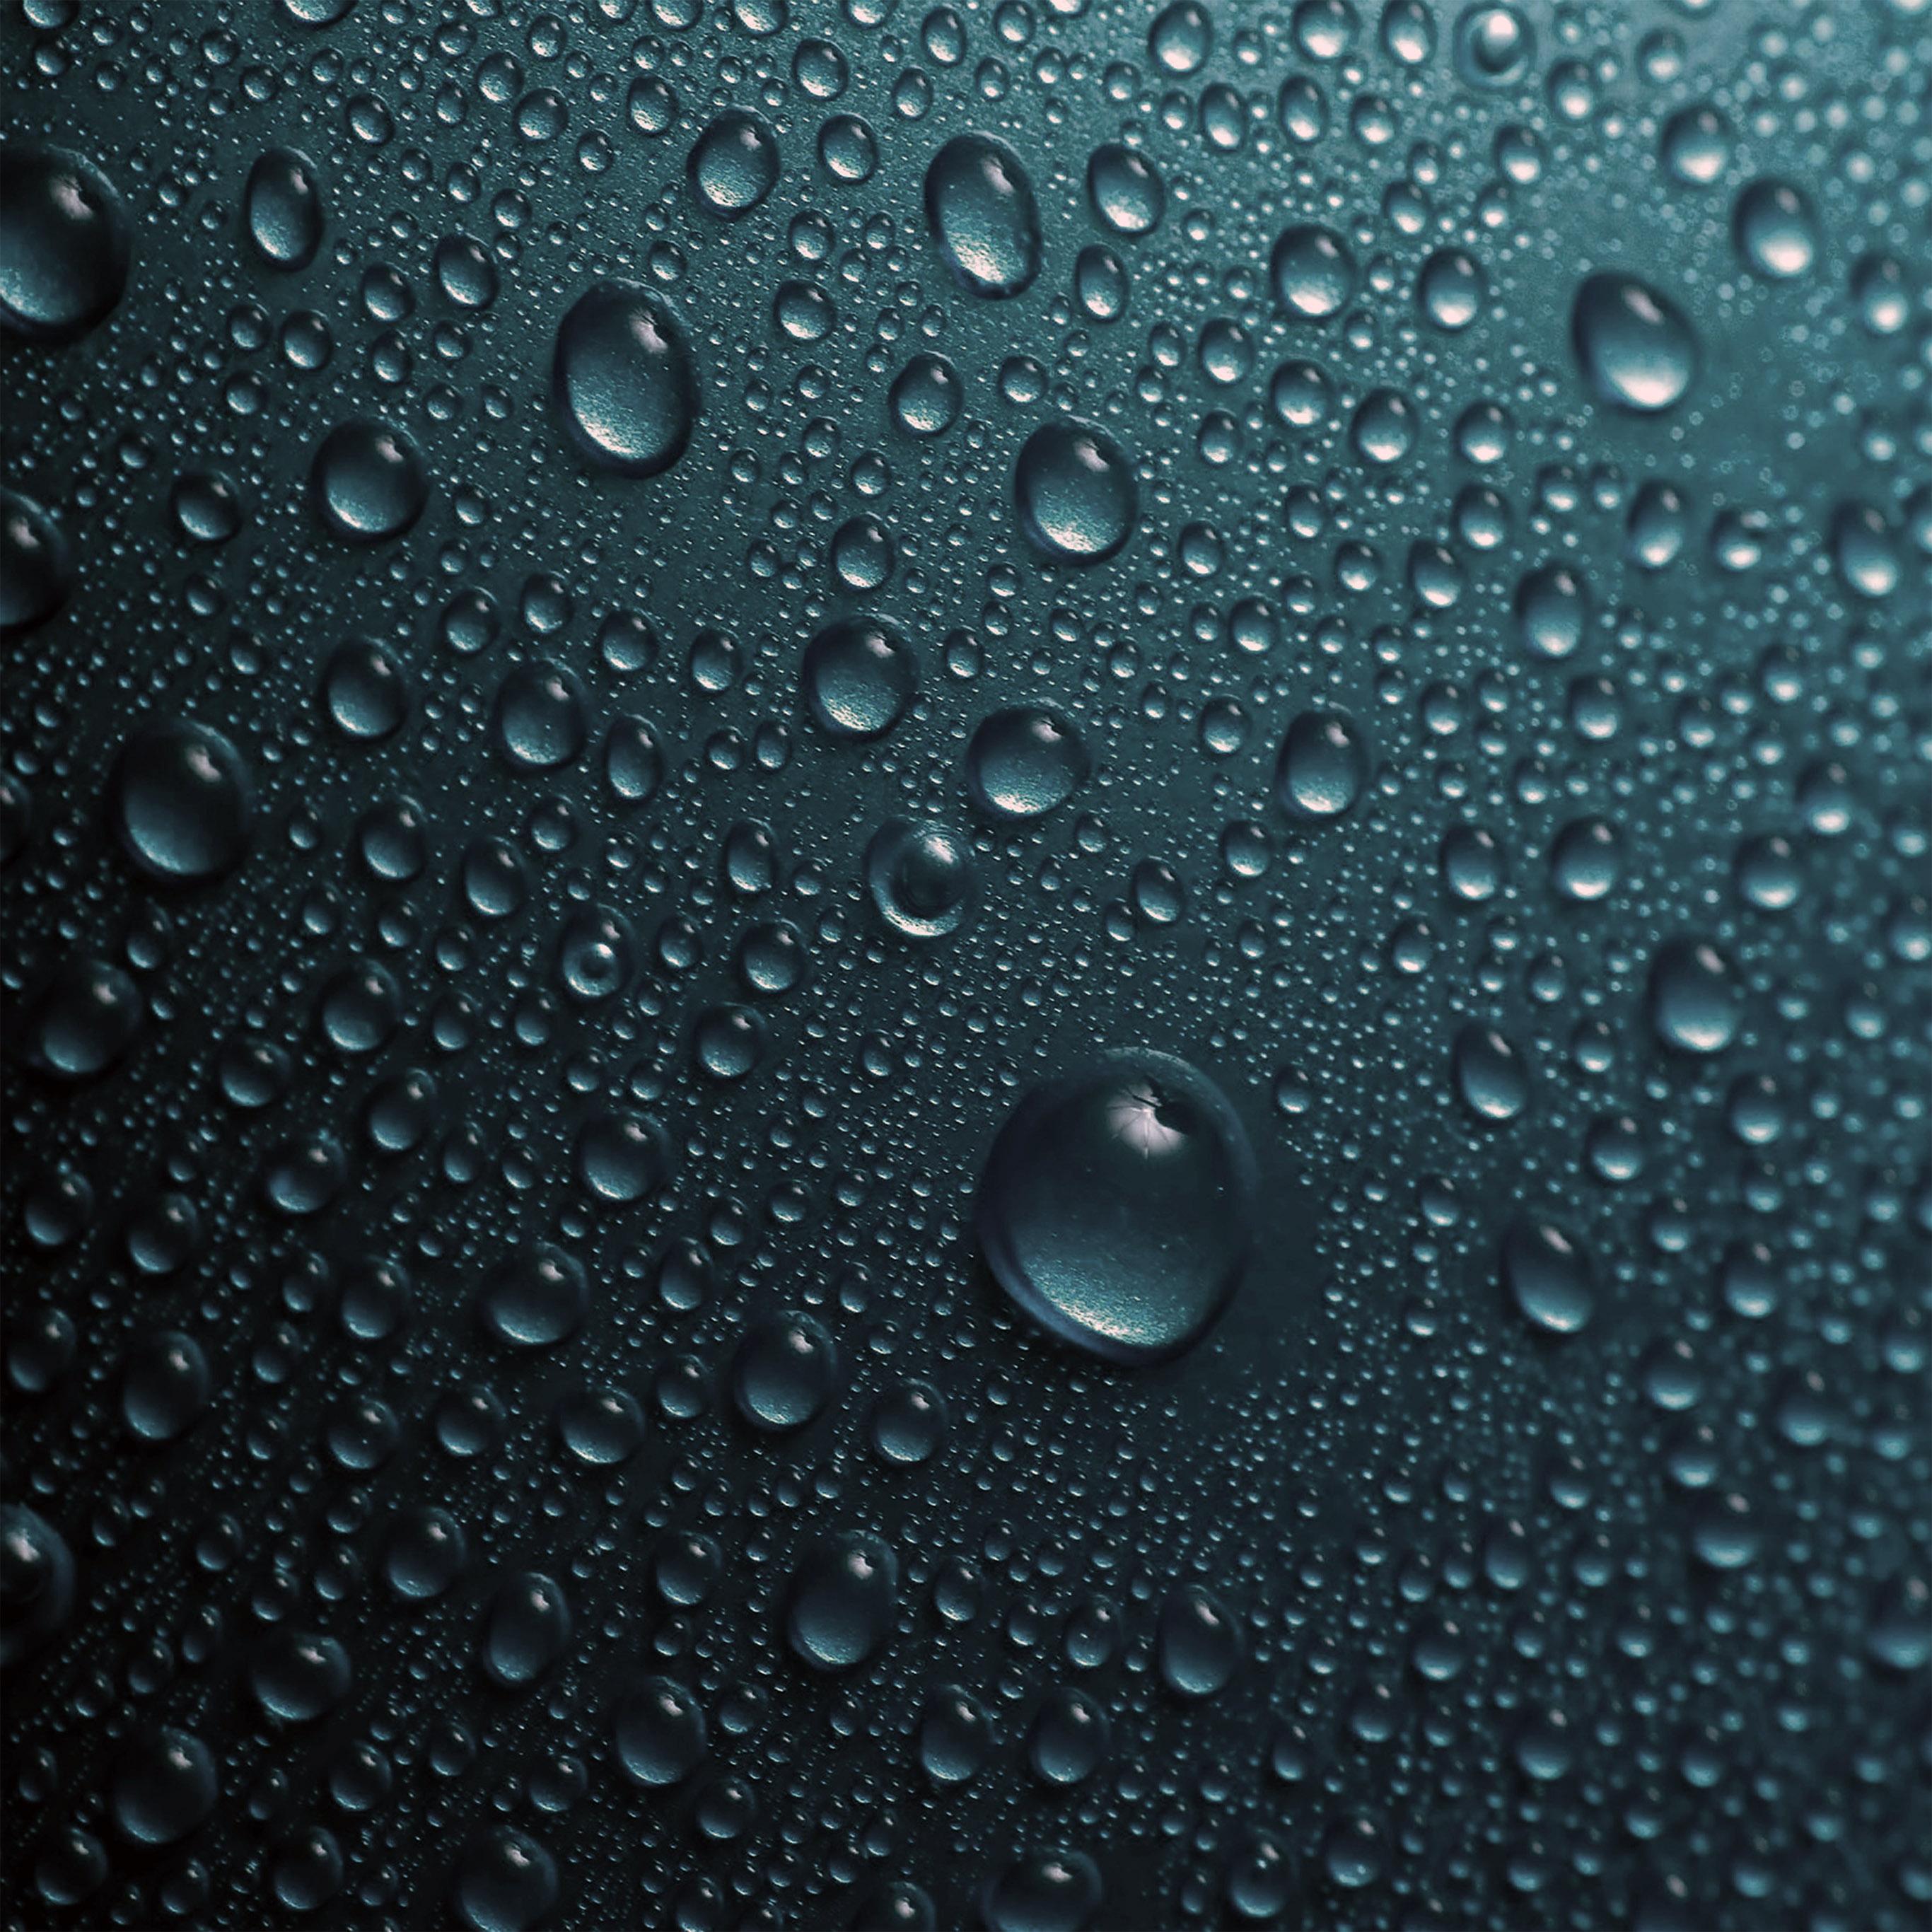 Rain Droplets Wallpapers - Top Free Rain Droplets Backgrounds ...